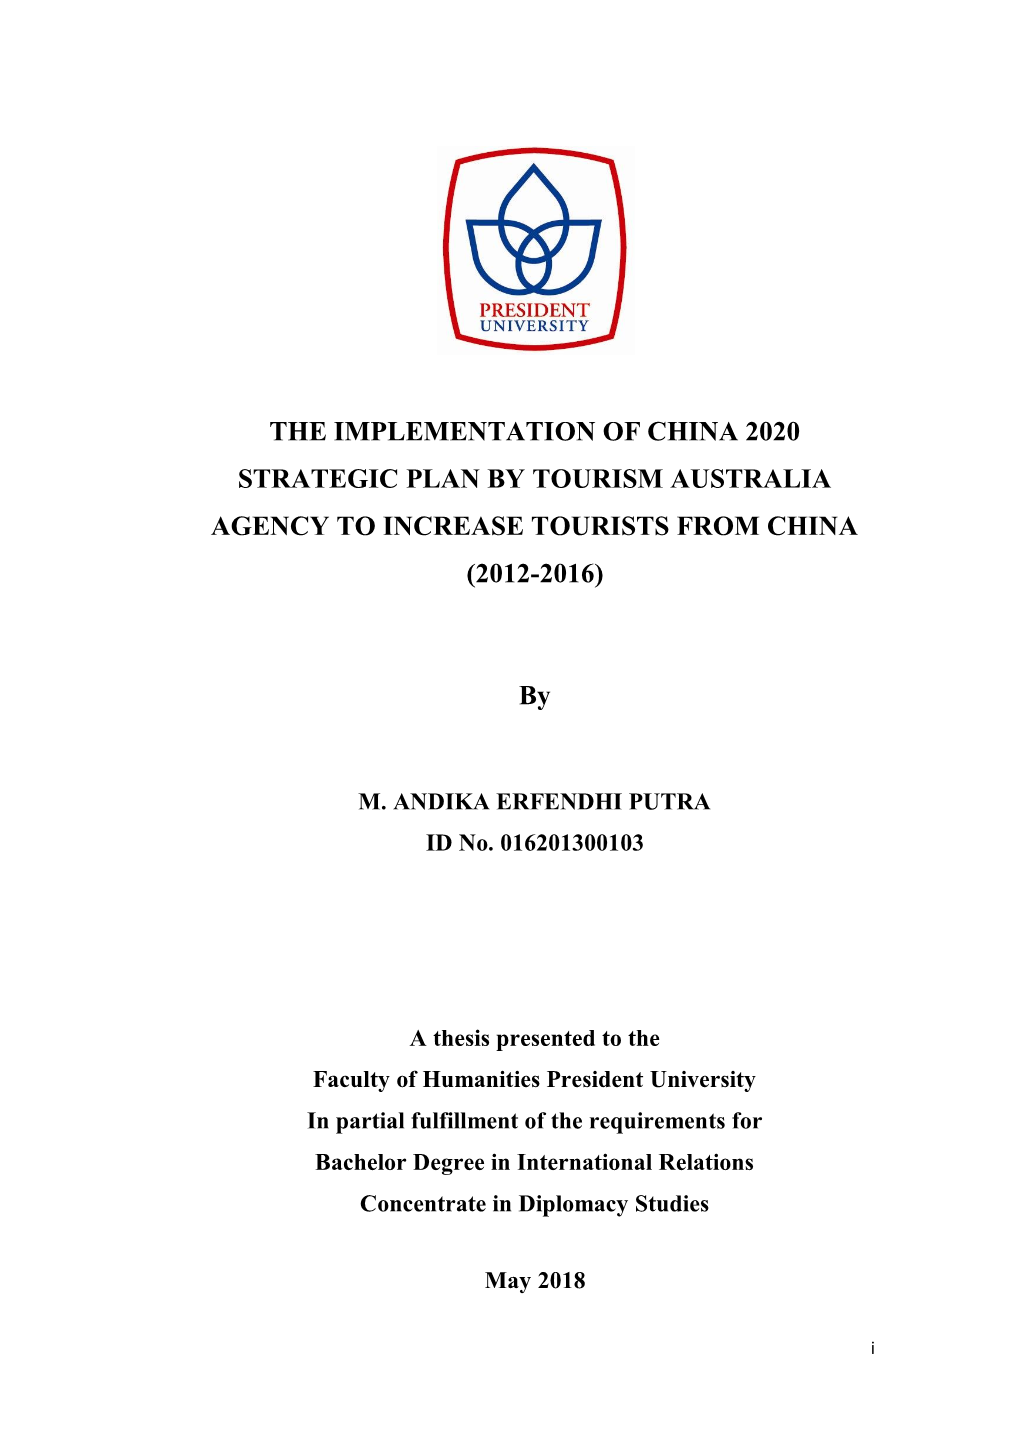 The Implementation of China 2020 Strategic Plan by Tourism Australia Agency to Increase Tourists from China (2012-2016)